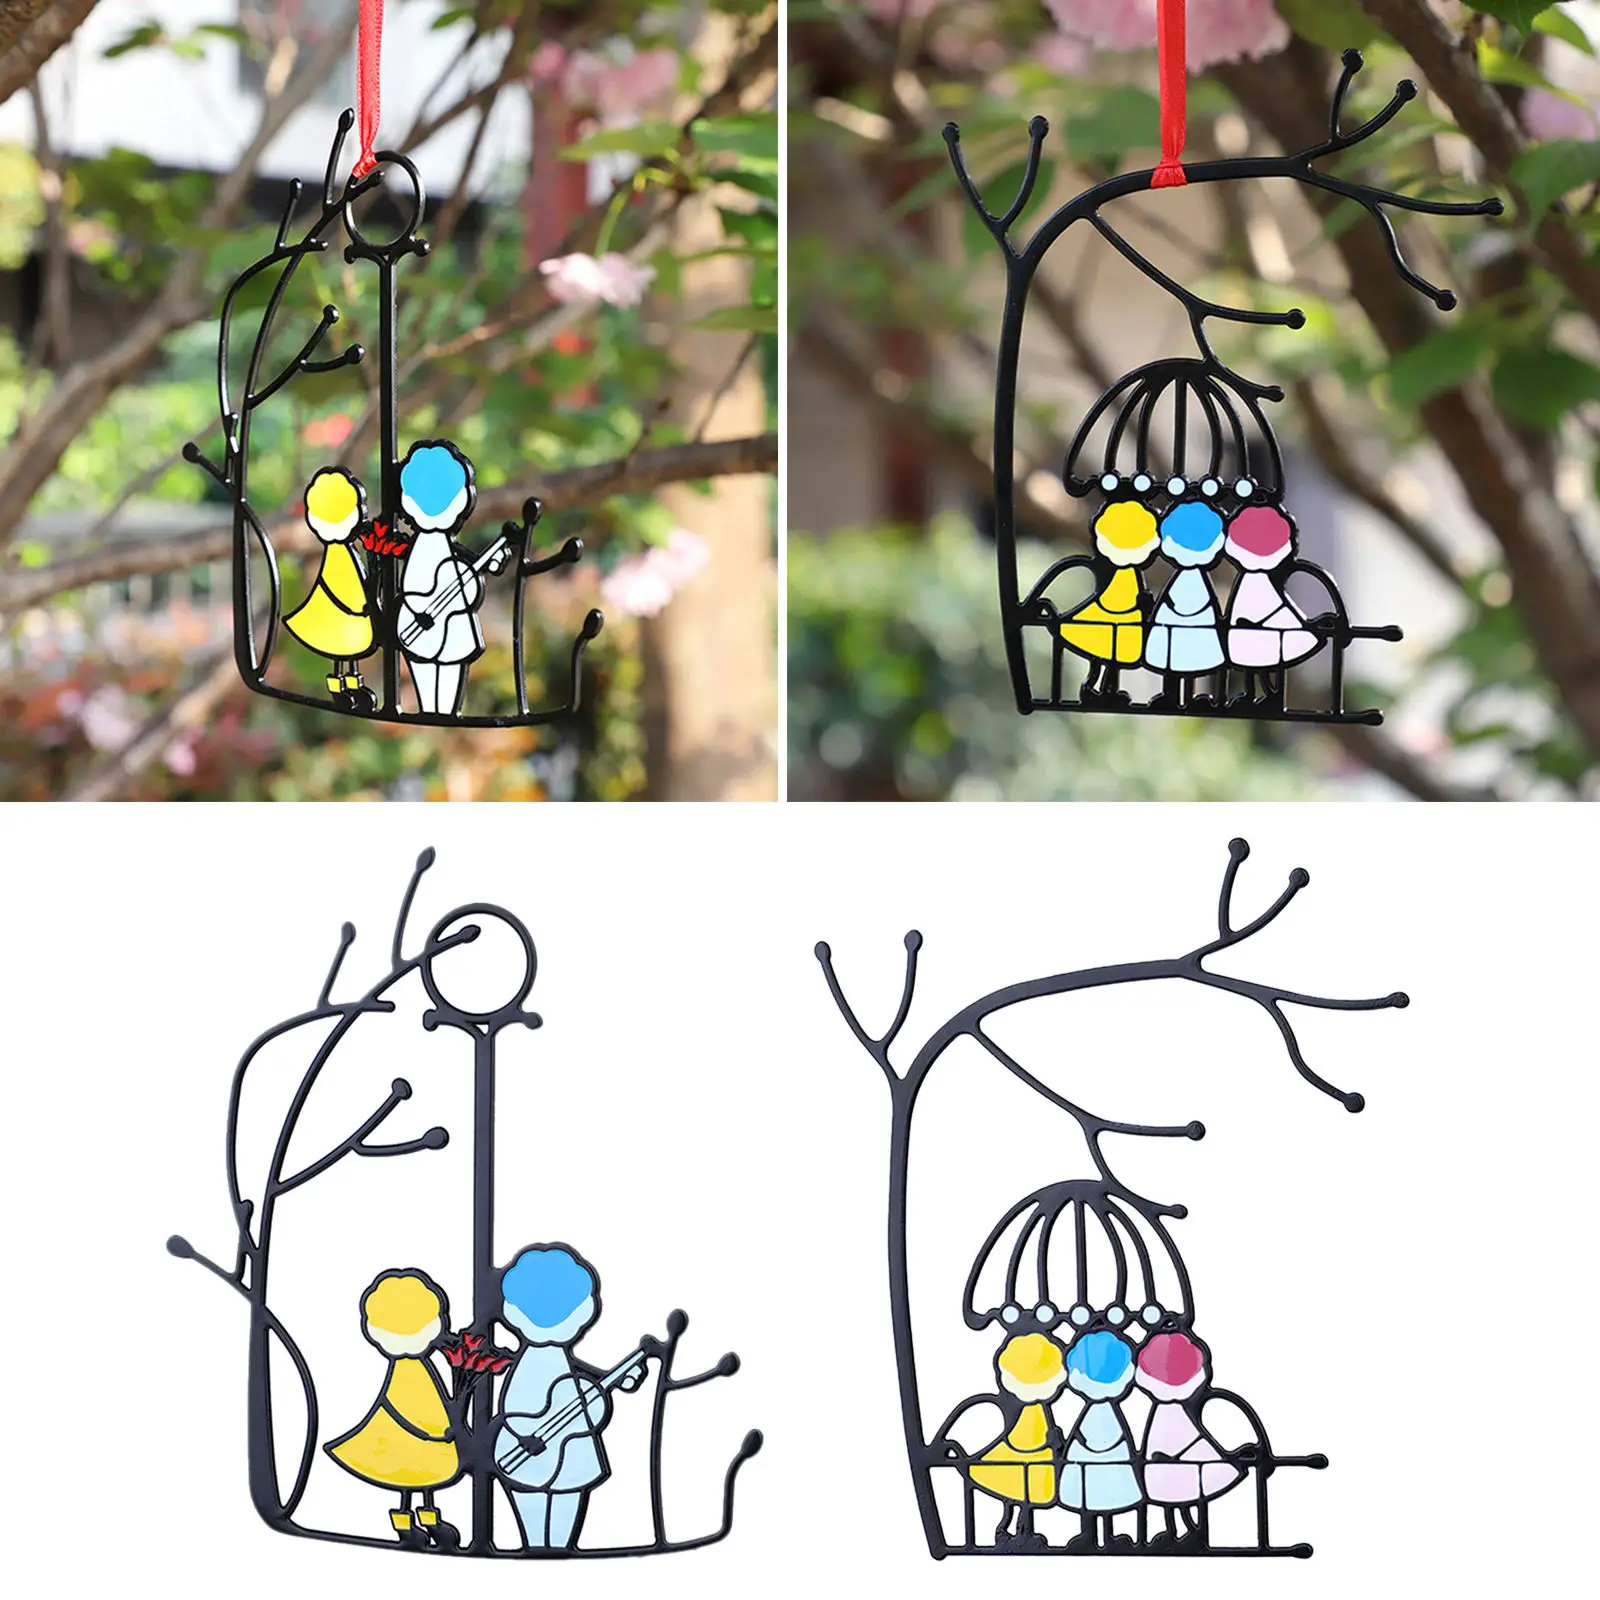 Colorful Cute Stained Glass  Outdoor Garden Decor Pendant Ornament for Garden Outdoor Home Kids Room Window